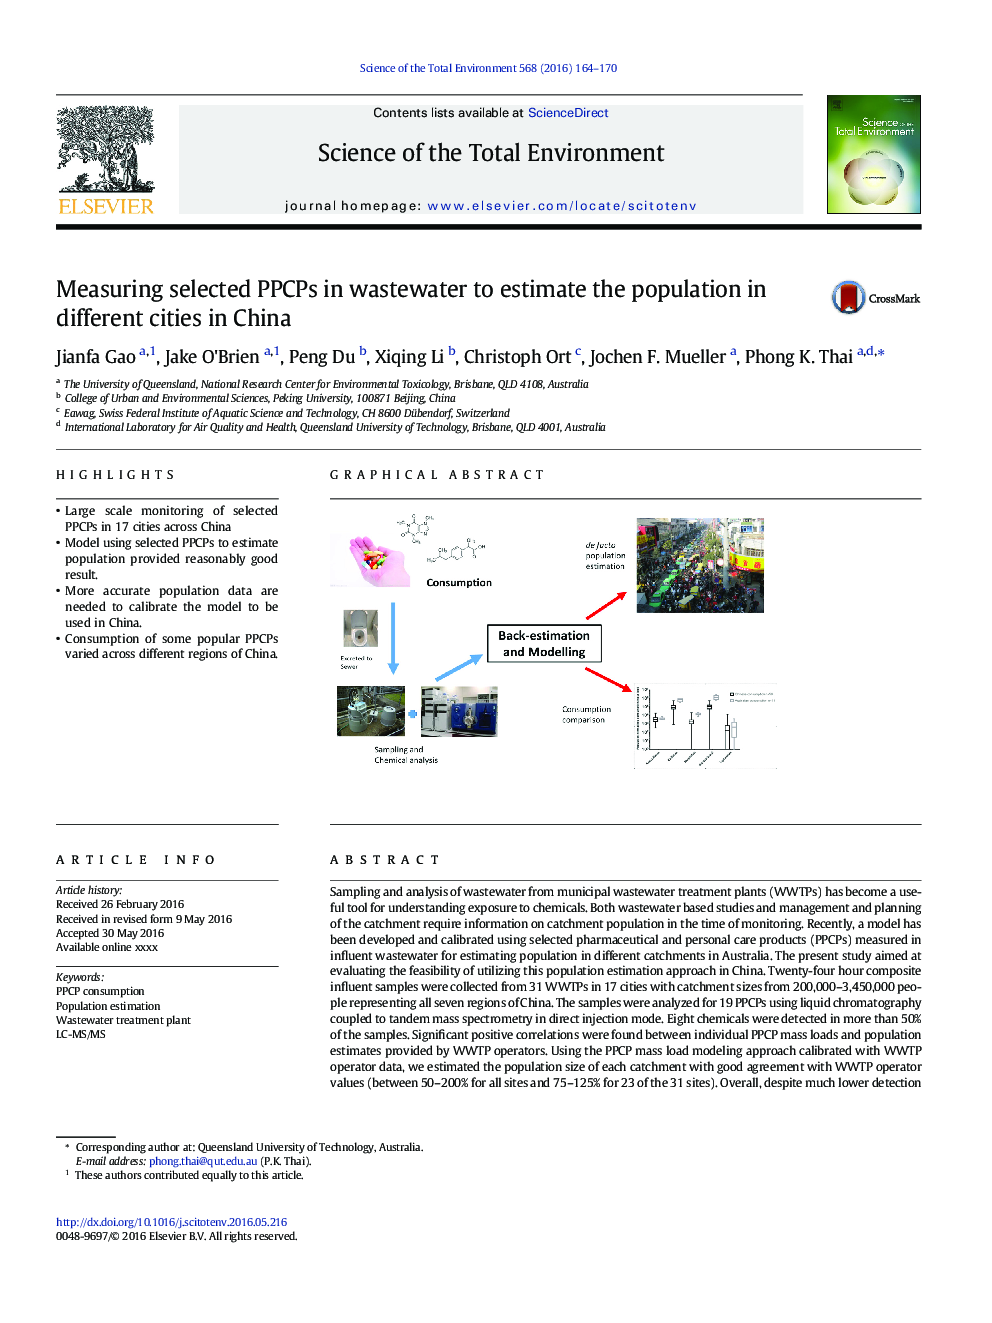 Measuring selected PPCPs in wastewater to estimate the population in different cities in China